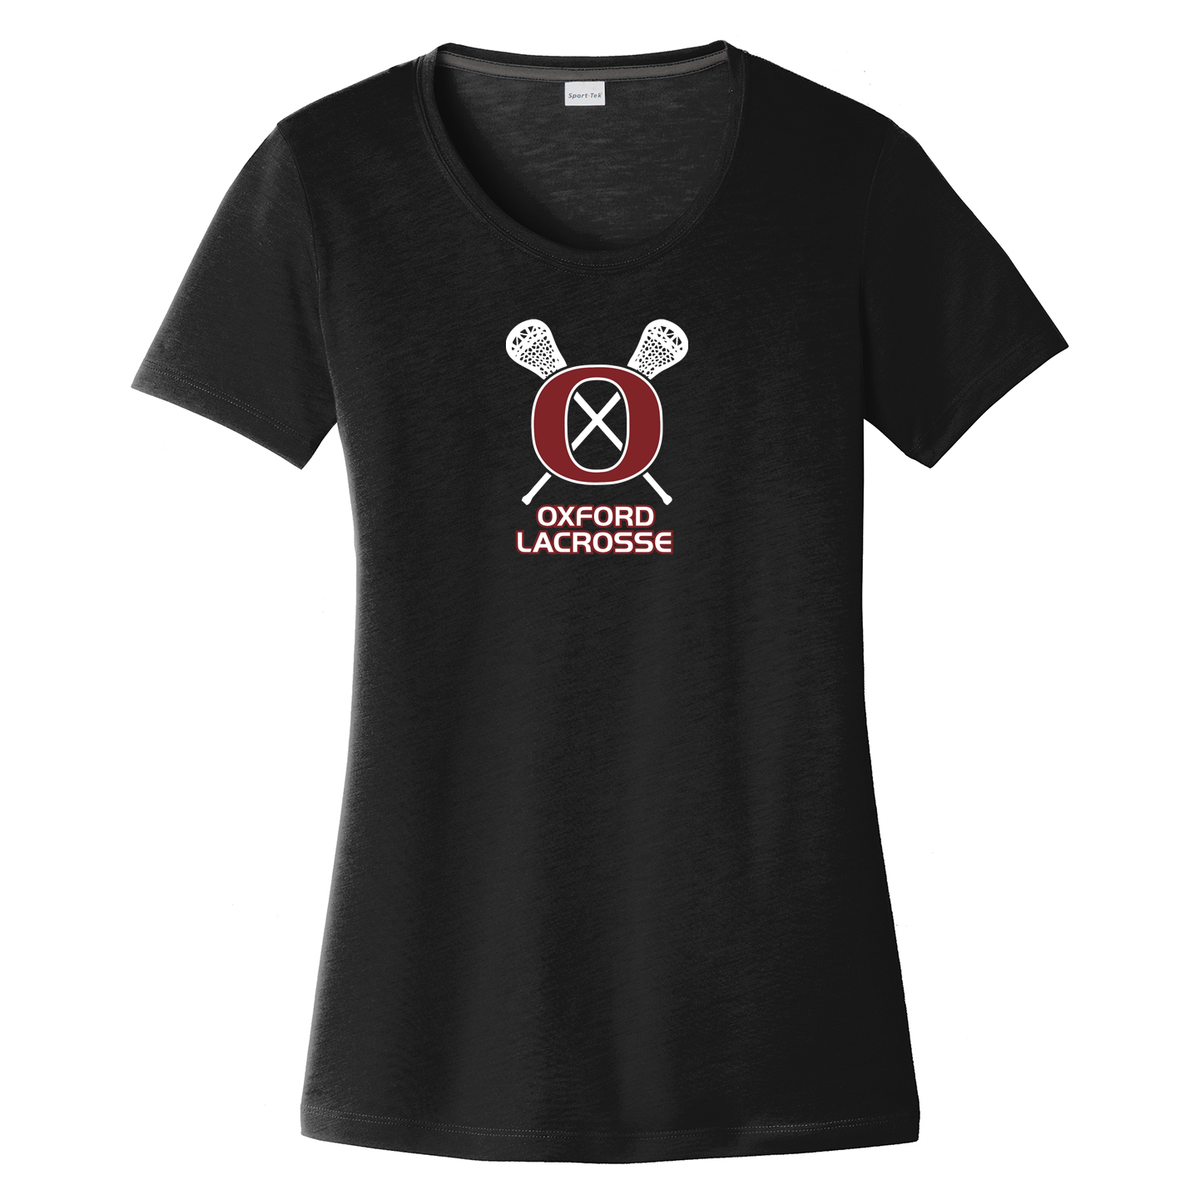 Oxford Youth Lacrosse Women's CottonTouch Performance T-Shirt